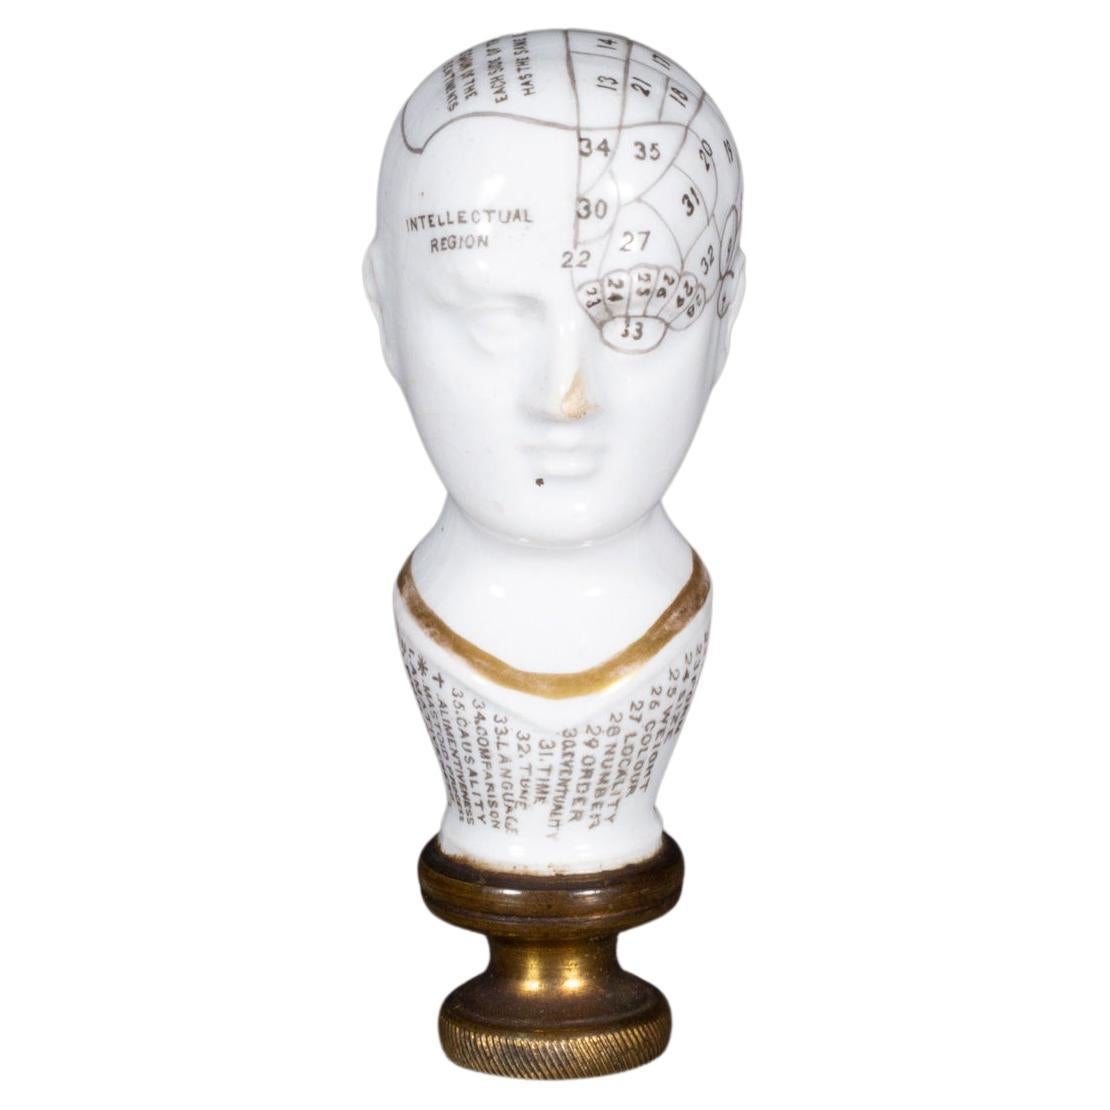 What is phrenology in simple terms?